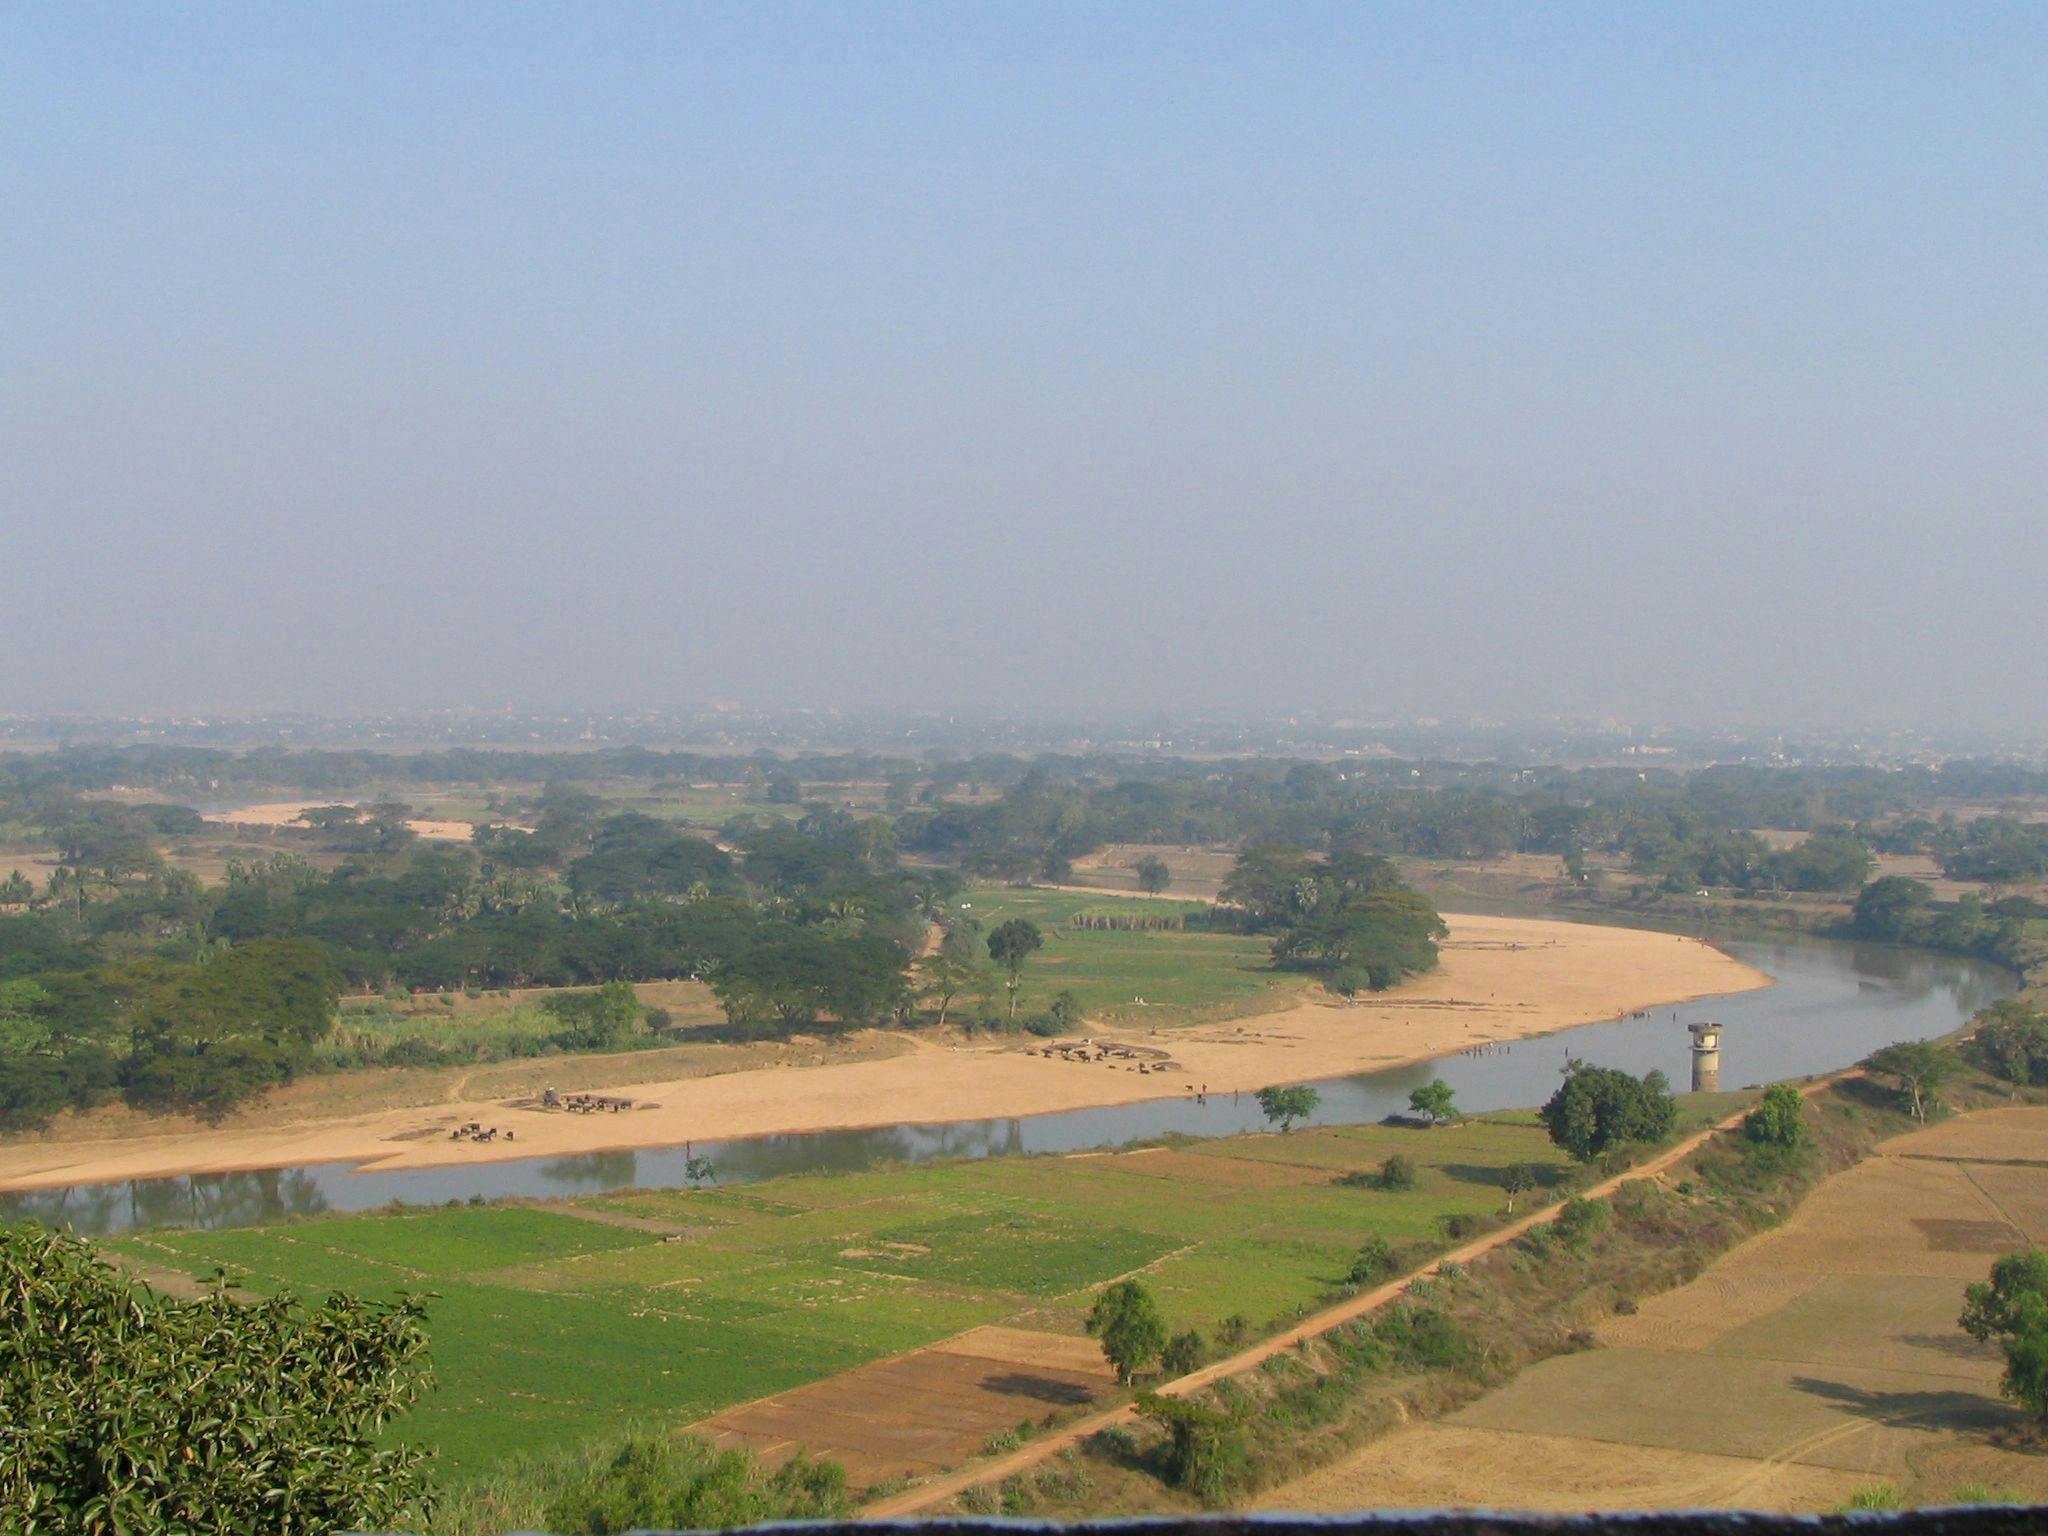 A view of the banks of the Daya River, the supposed battlefield of Kalinga from atop Dhauli hills